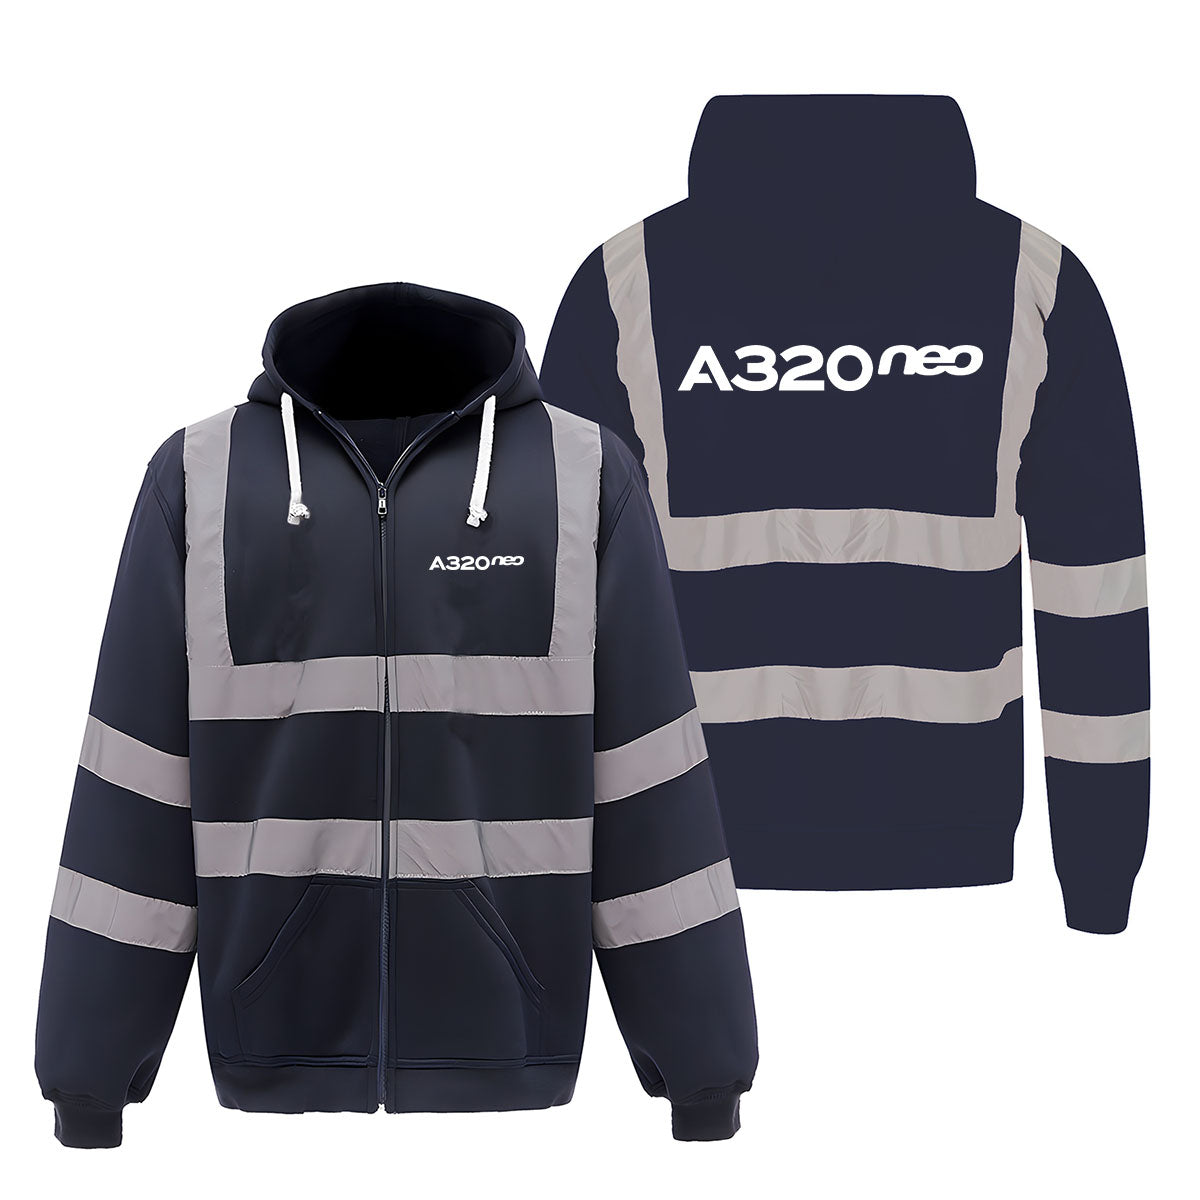 A320neo & Text Designed Reflective Zipped Hoodies